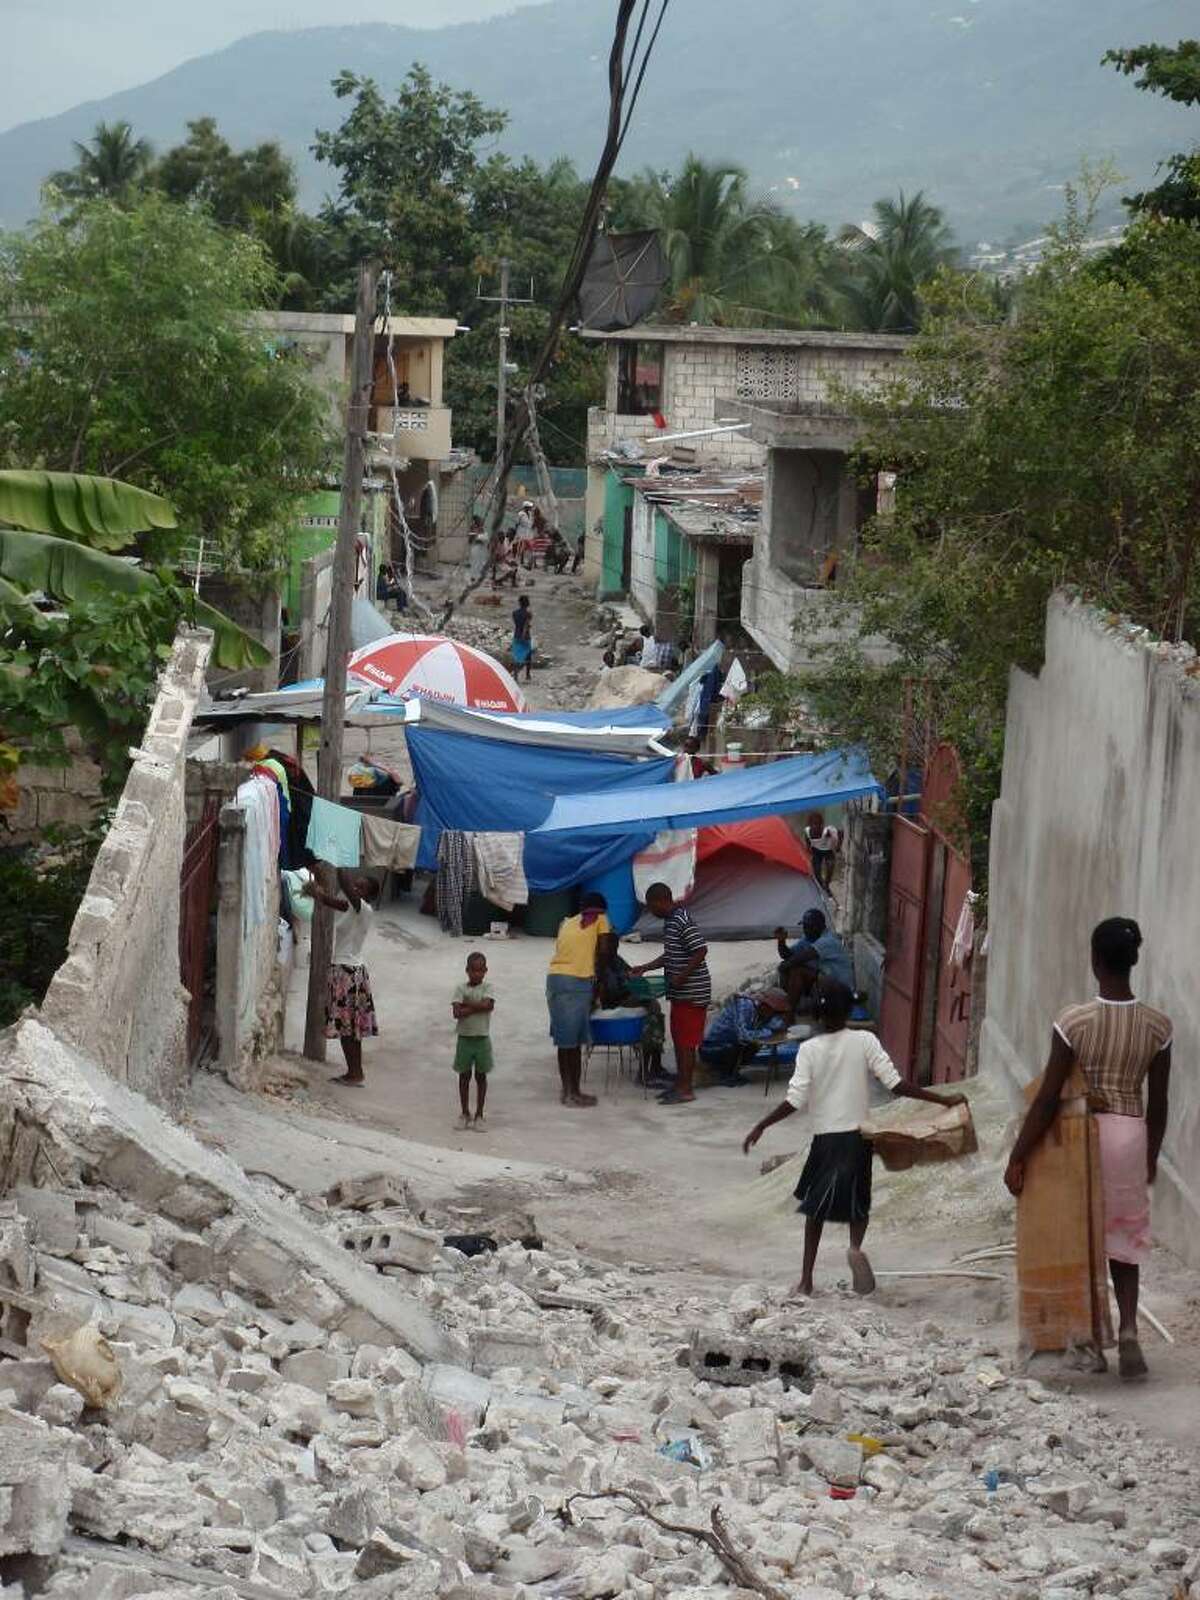 Destruction in the aftermath of the earthquake in Haiti, Jan. 2010.